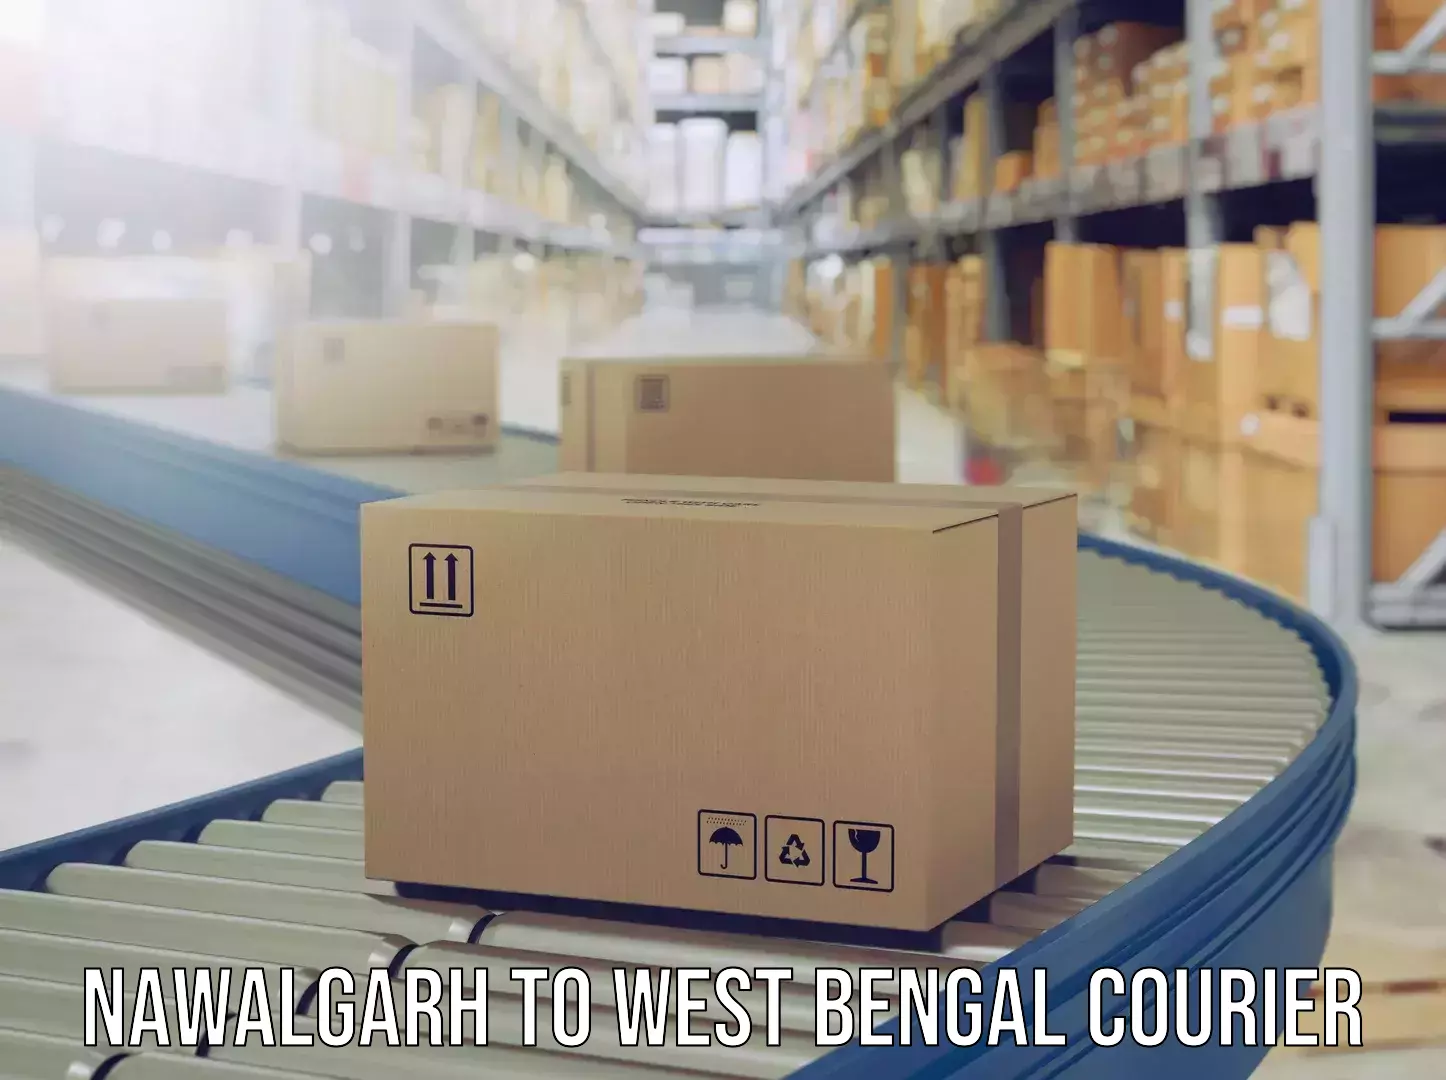 Luggage delivery app Nawalgarh to West Bengal